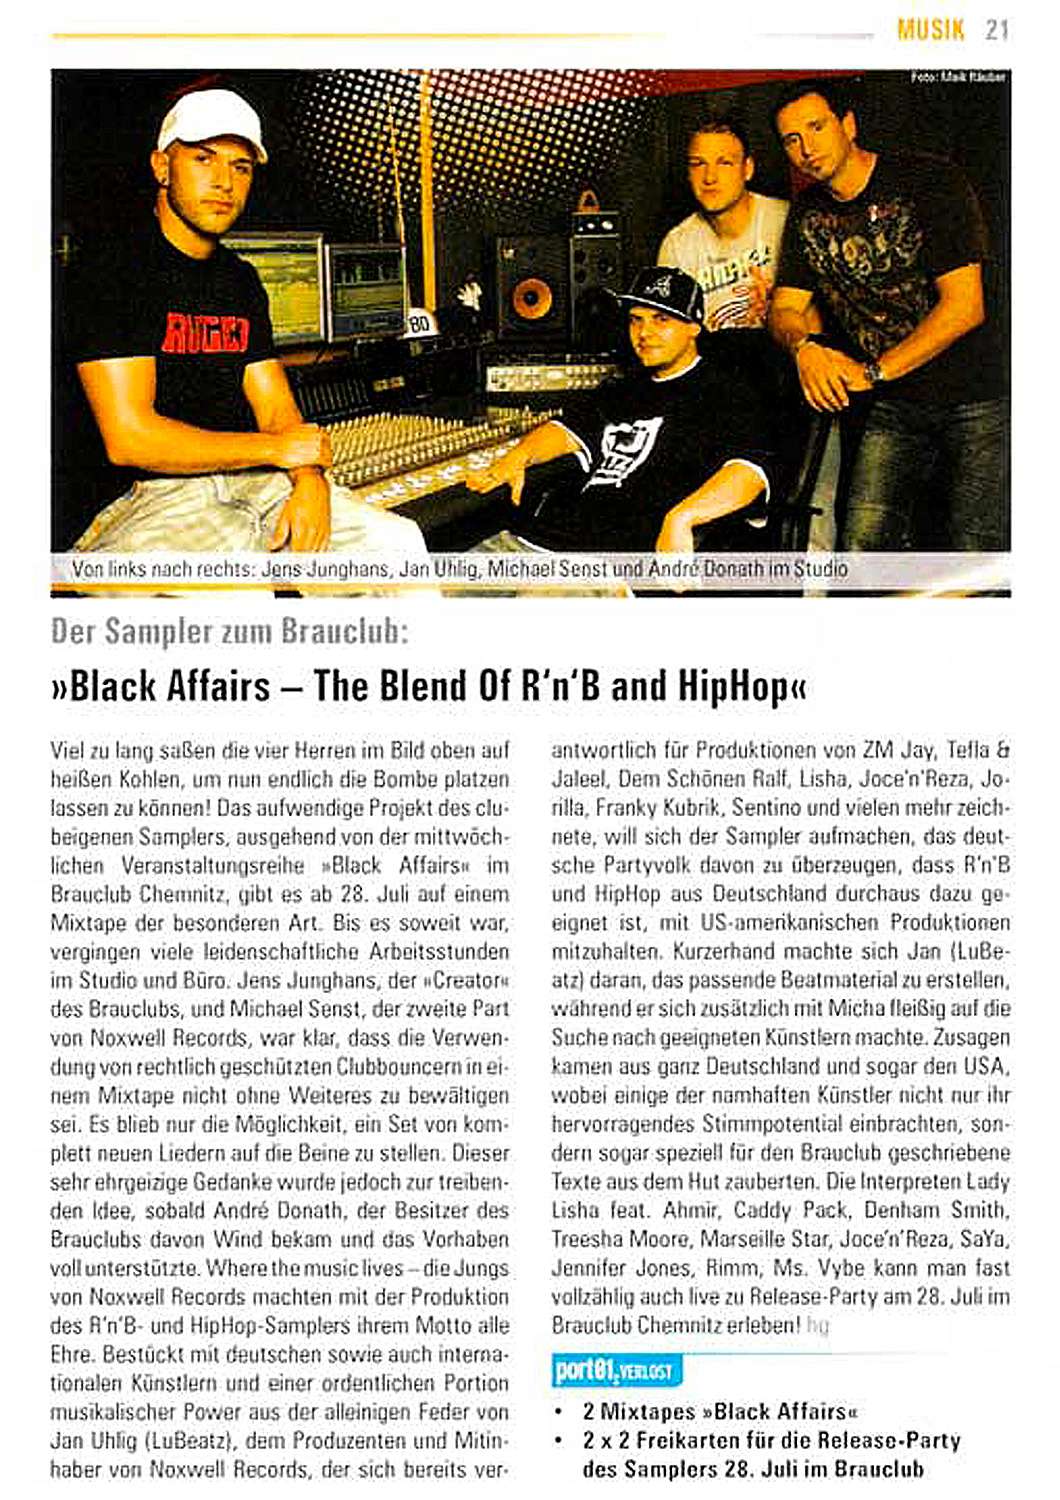 Jan Uhlig - LuBeatz - Noxwell - Black Affairs - The Blend Of R'n'B and Hiphop